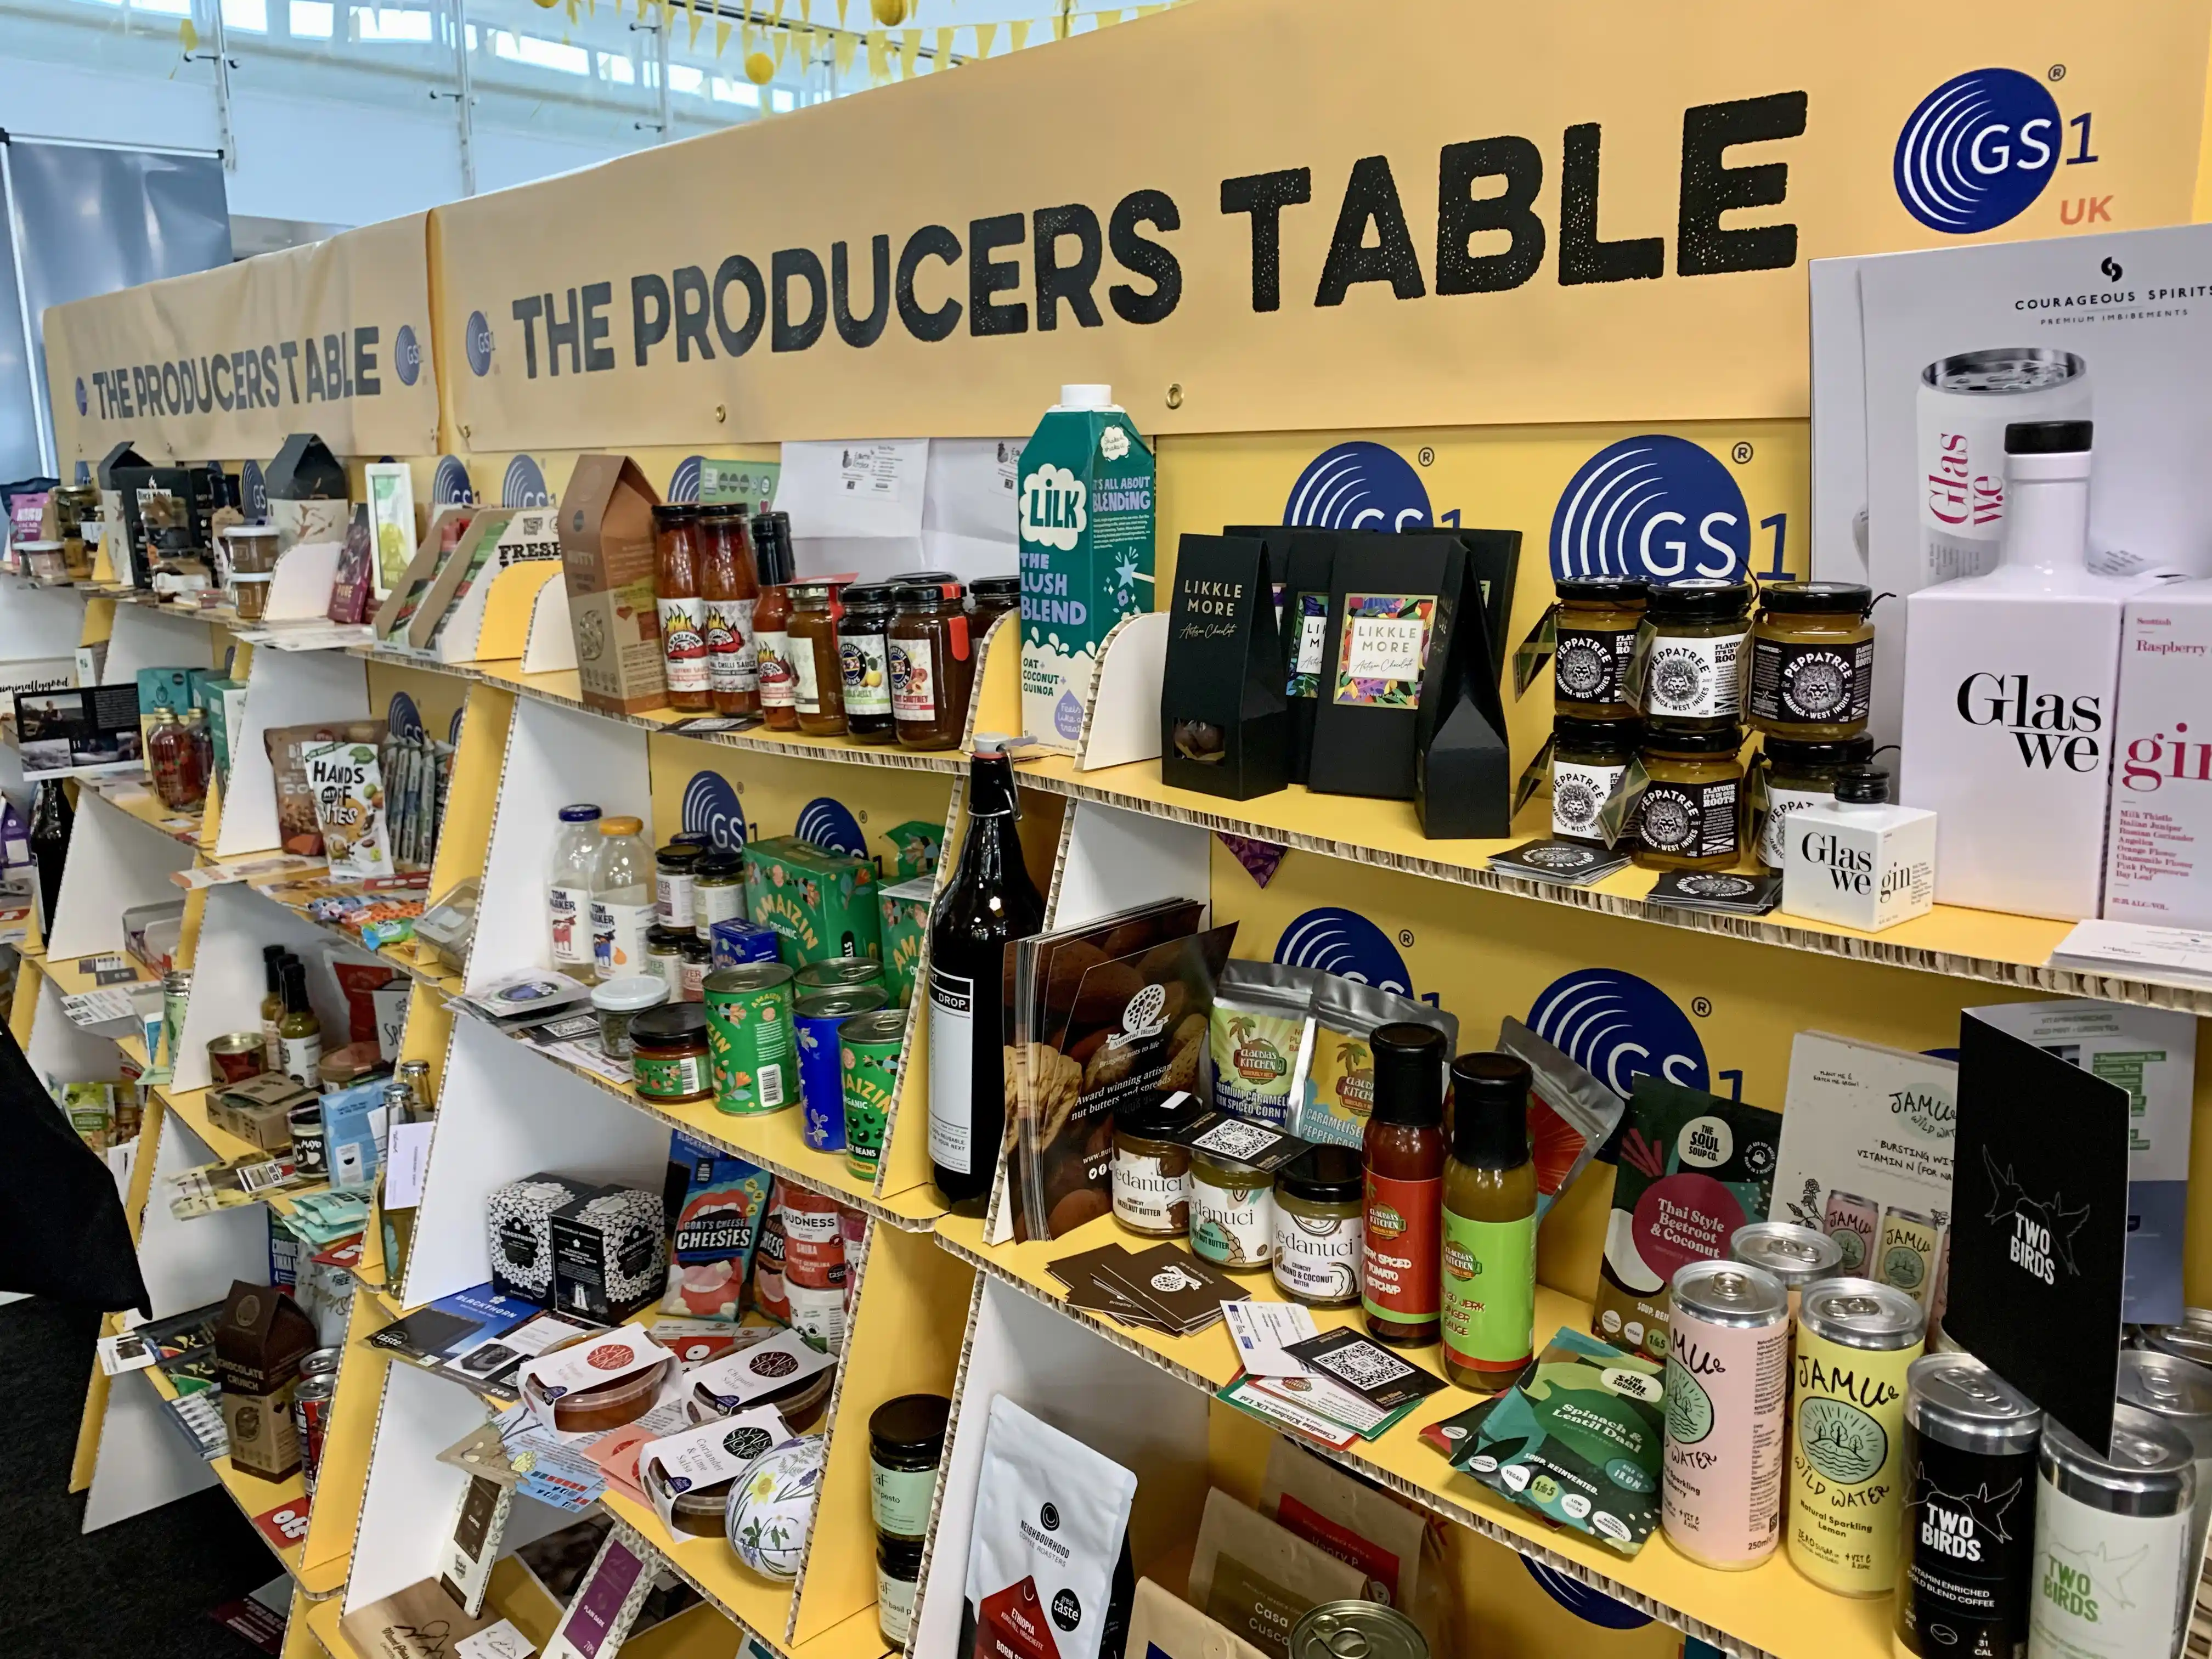 Producers Table display all